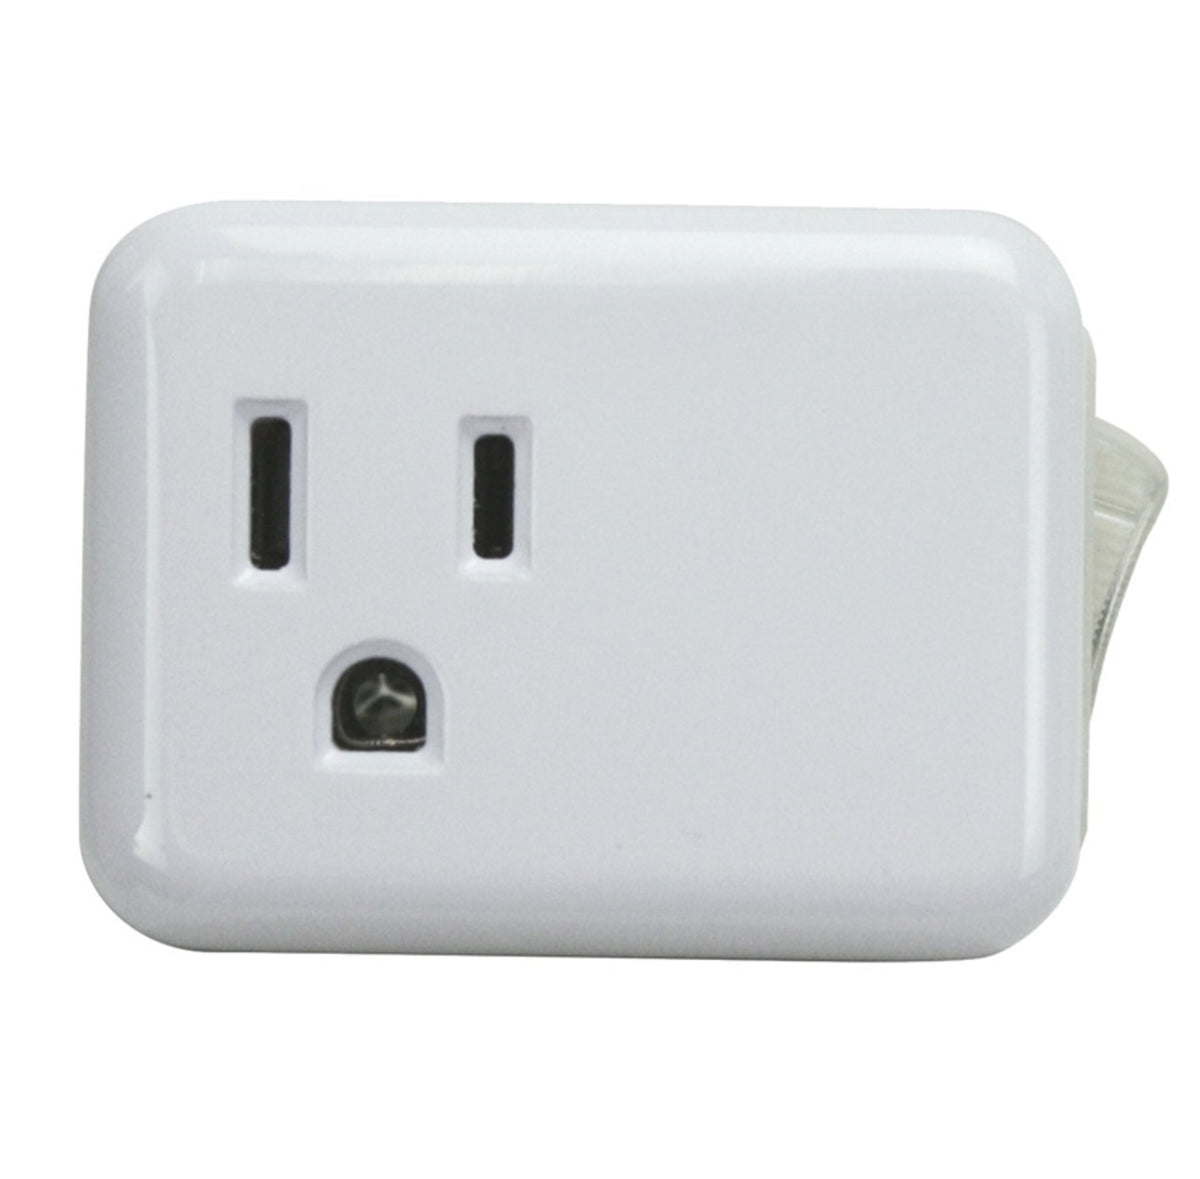 PowerZone ORES001 Outlet Tap Cube With On-Off Switch, 1 Outlet